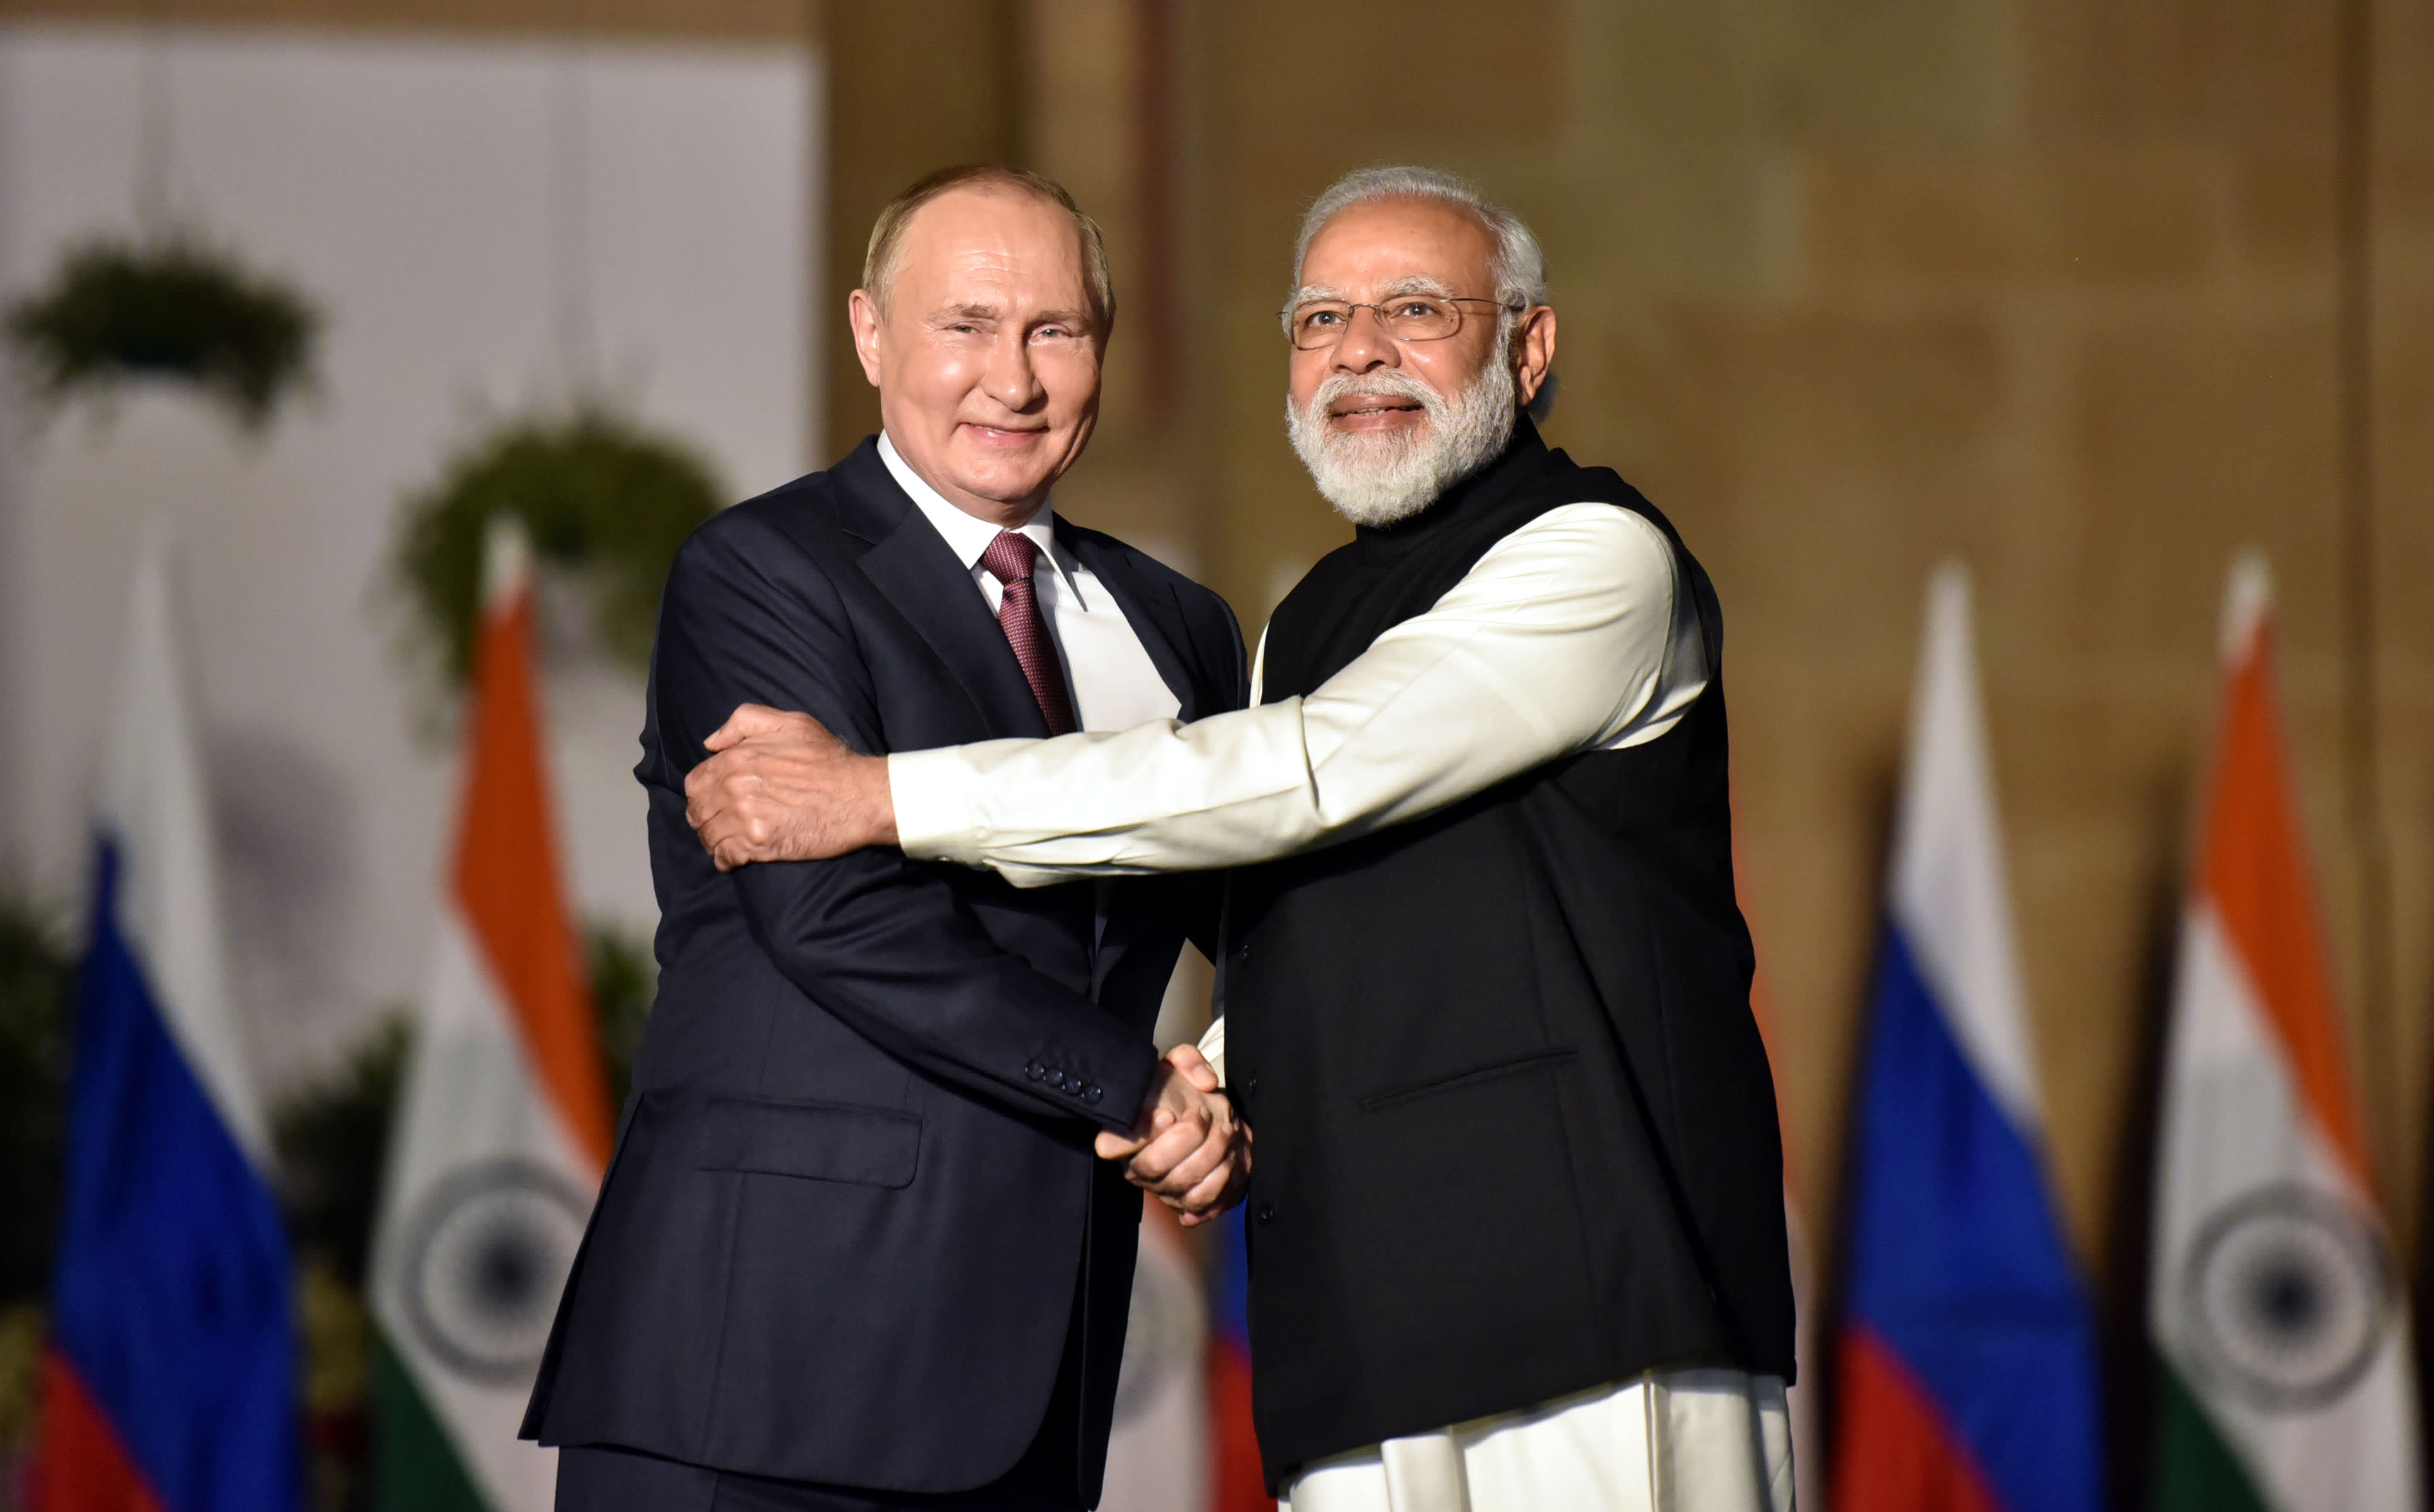 The Rupee Dilemma: How India and Russia Struggle to Settle Their Trade